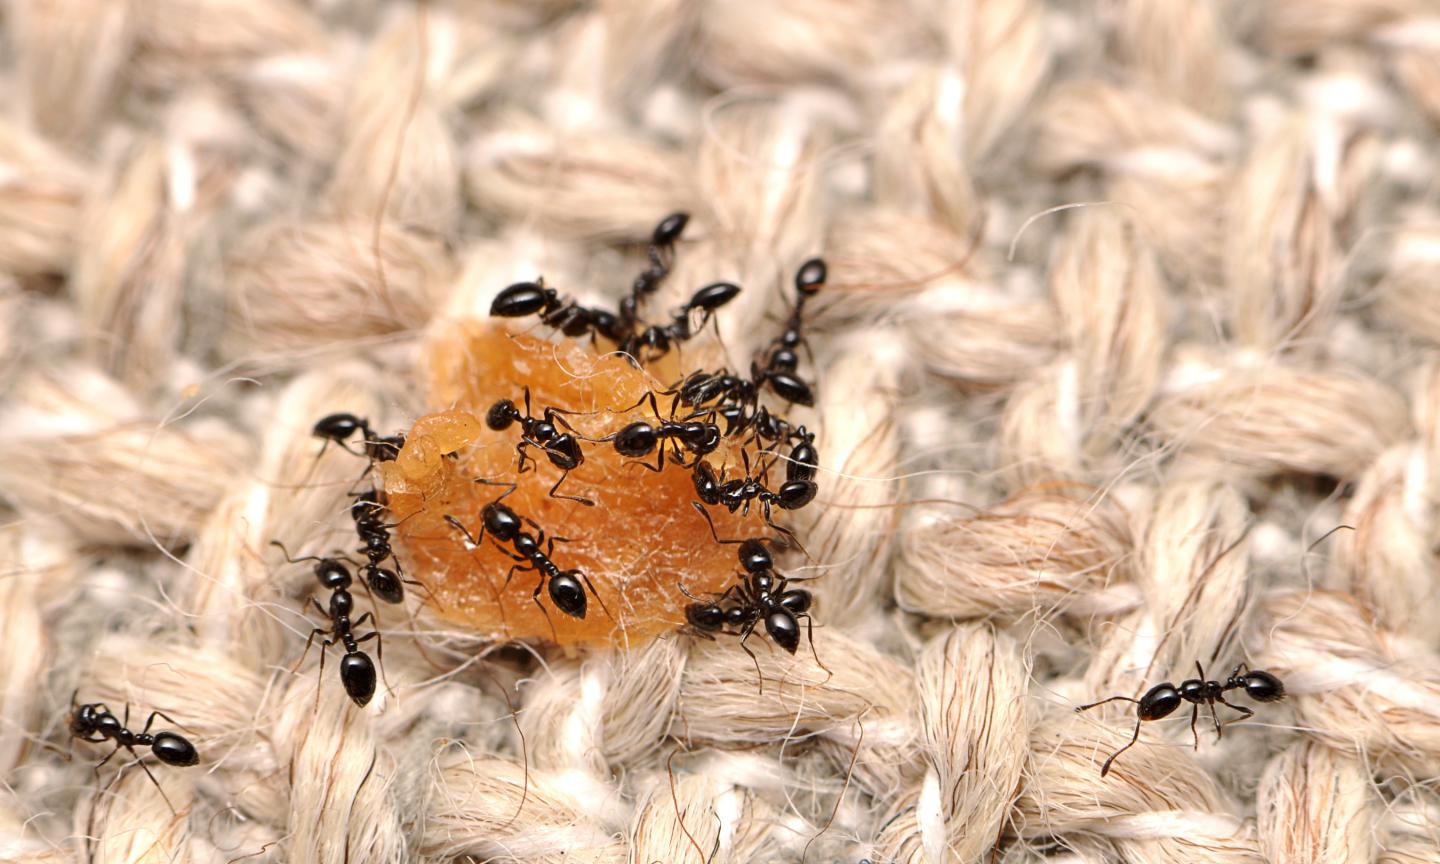 Black Ants (Monomorium Minimum) Little black ants have a shiny black color and prefer to live outdoors in decaying wood, but will also build their nests in cracks in walls or cement. Outside, little black ants establish their nests under rocks or stones and in rotting logs, gardens and other open areas. Their nests can also be located within small craters of very fine soil. Indoors, little black ants build their nests in voids and cavities such as wall voids.